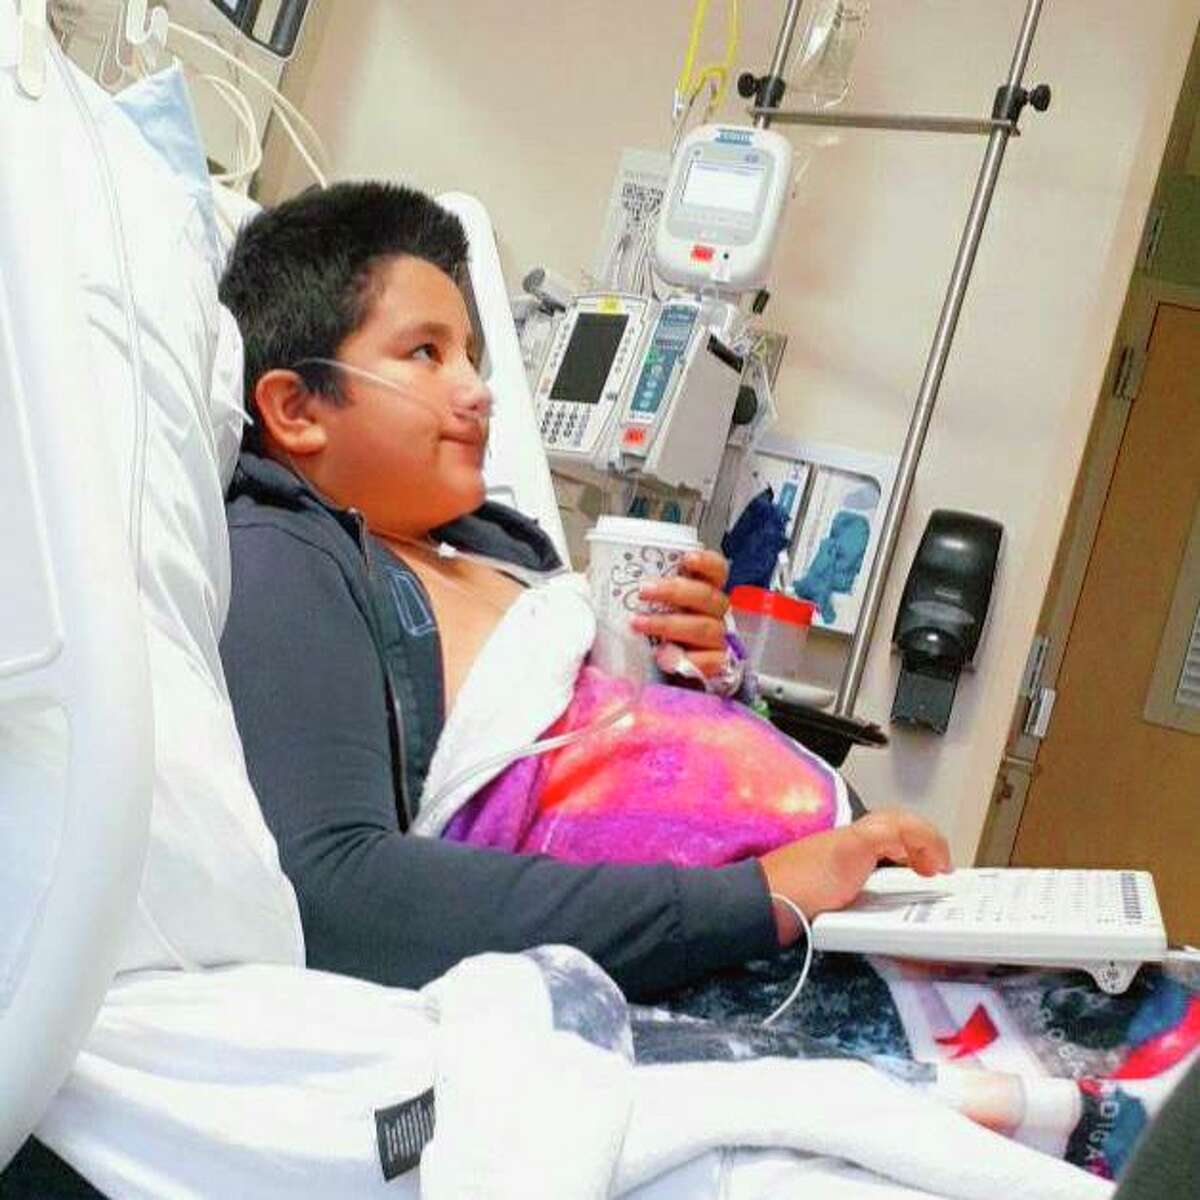 This 2021 photo provided by Yessica Gonzalez shows her son, Francisco Rosales, 9, in the intensive care unit at Children’s Medical Center in Dallas, Texas. The day before he was supposed to start fourth grade, Francisco was admitted to the hospital due to severe COVID-19, struggling to breathe, with dangerously low oxygen levels and an uncertain outcome.